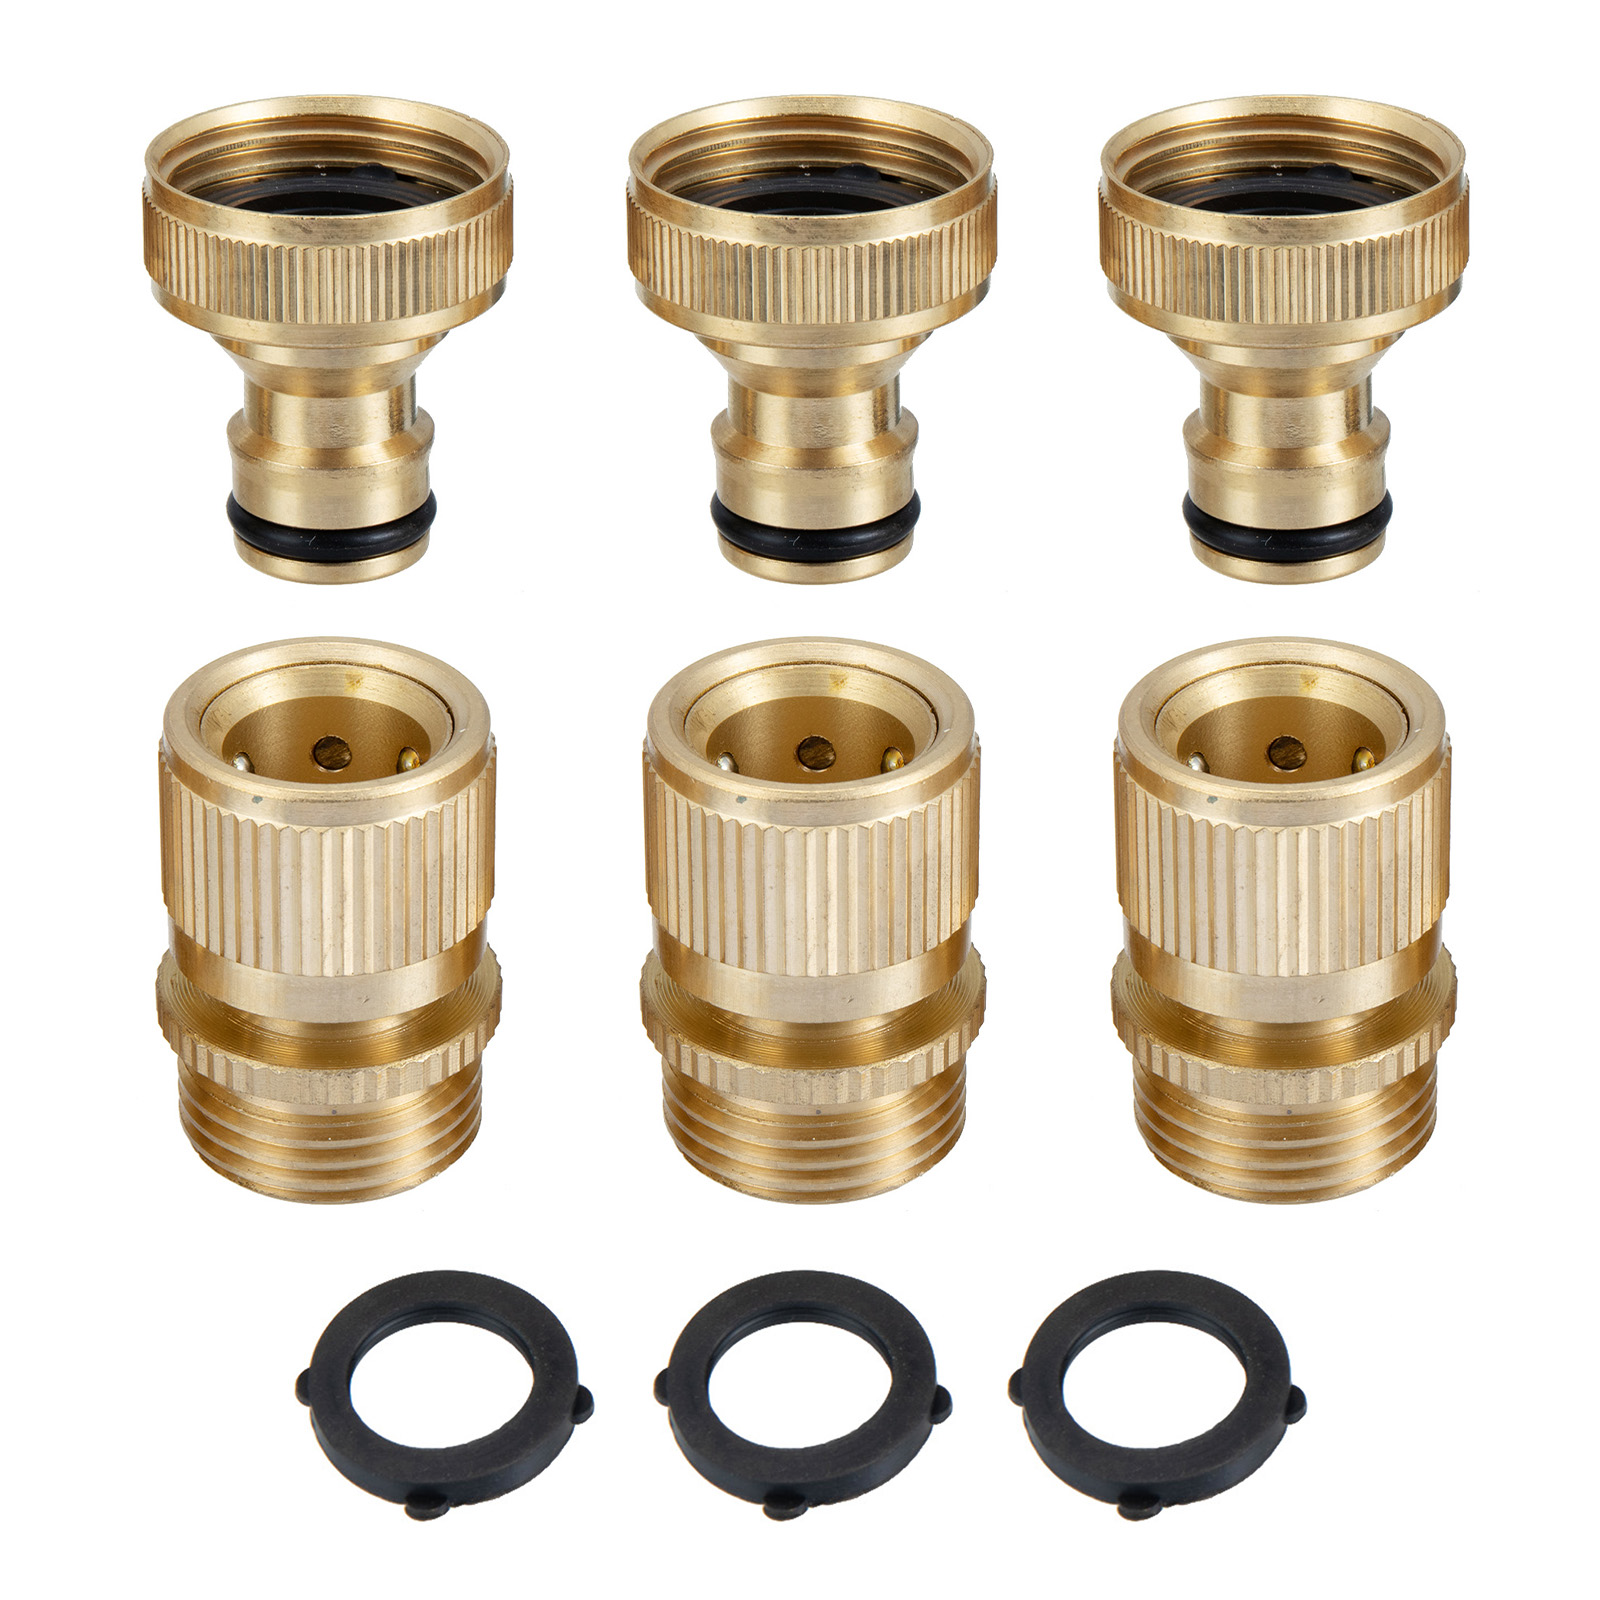 MATCC-Brass-Inner-Teeth-Quick-Connector-Set-34quot-GHT-Brass-Garden-Hose-Quick-Connector-With-Washer-1898352-7